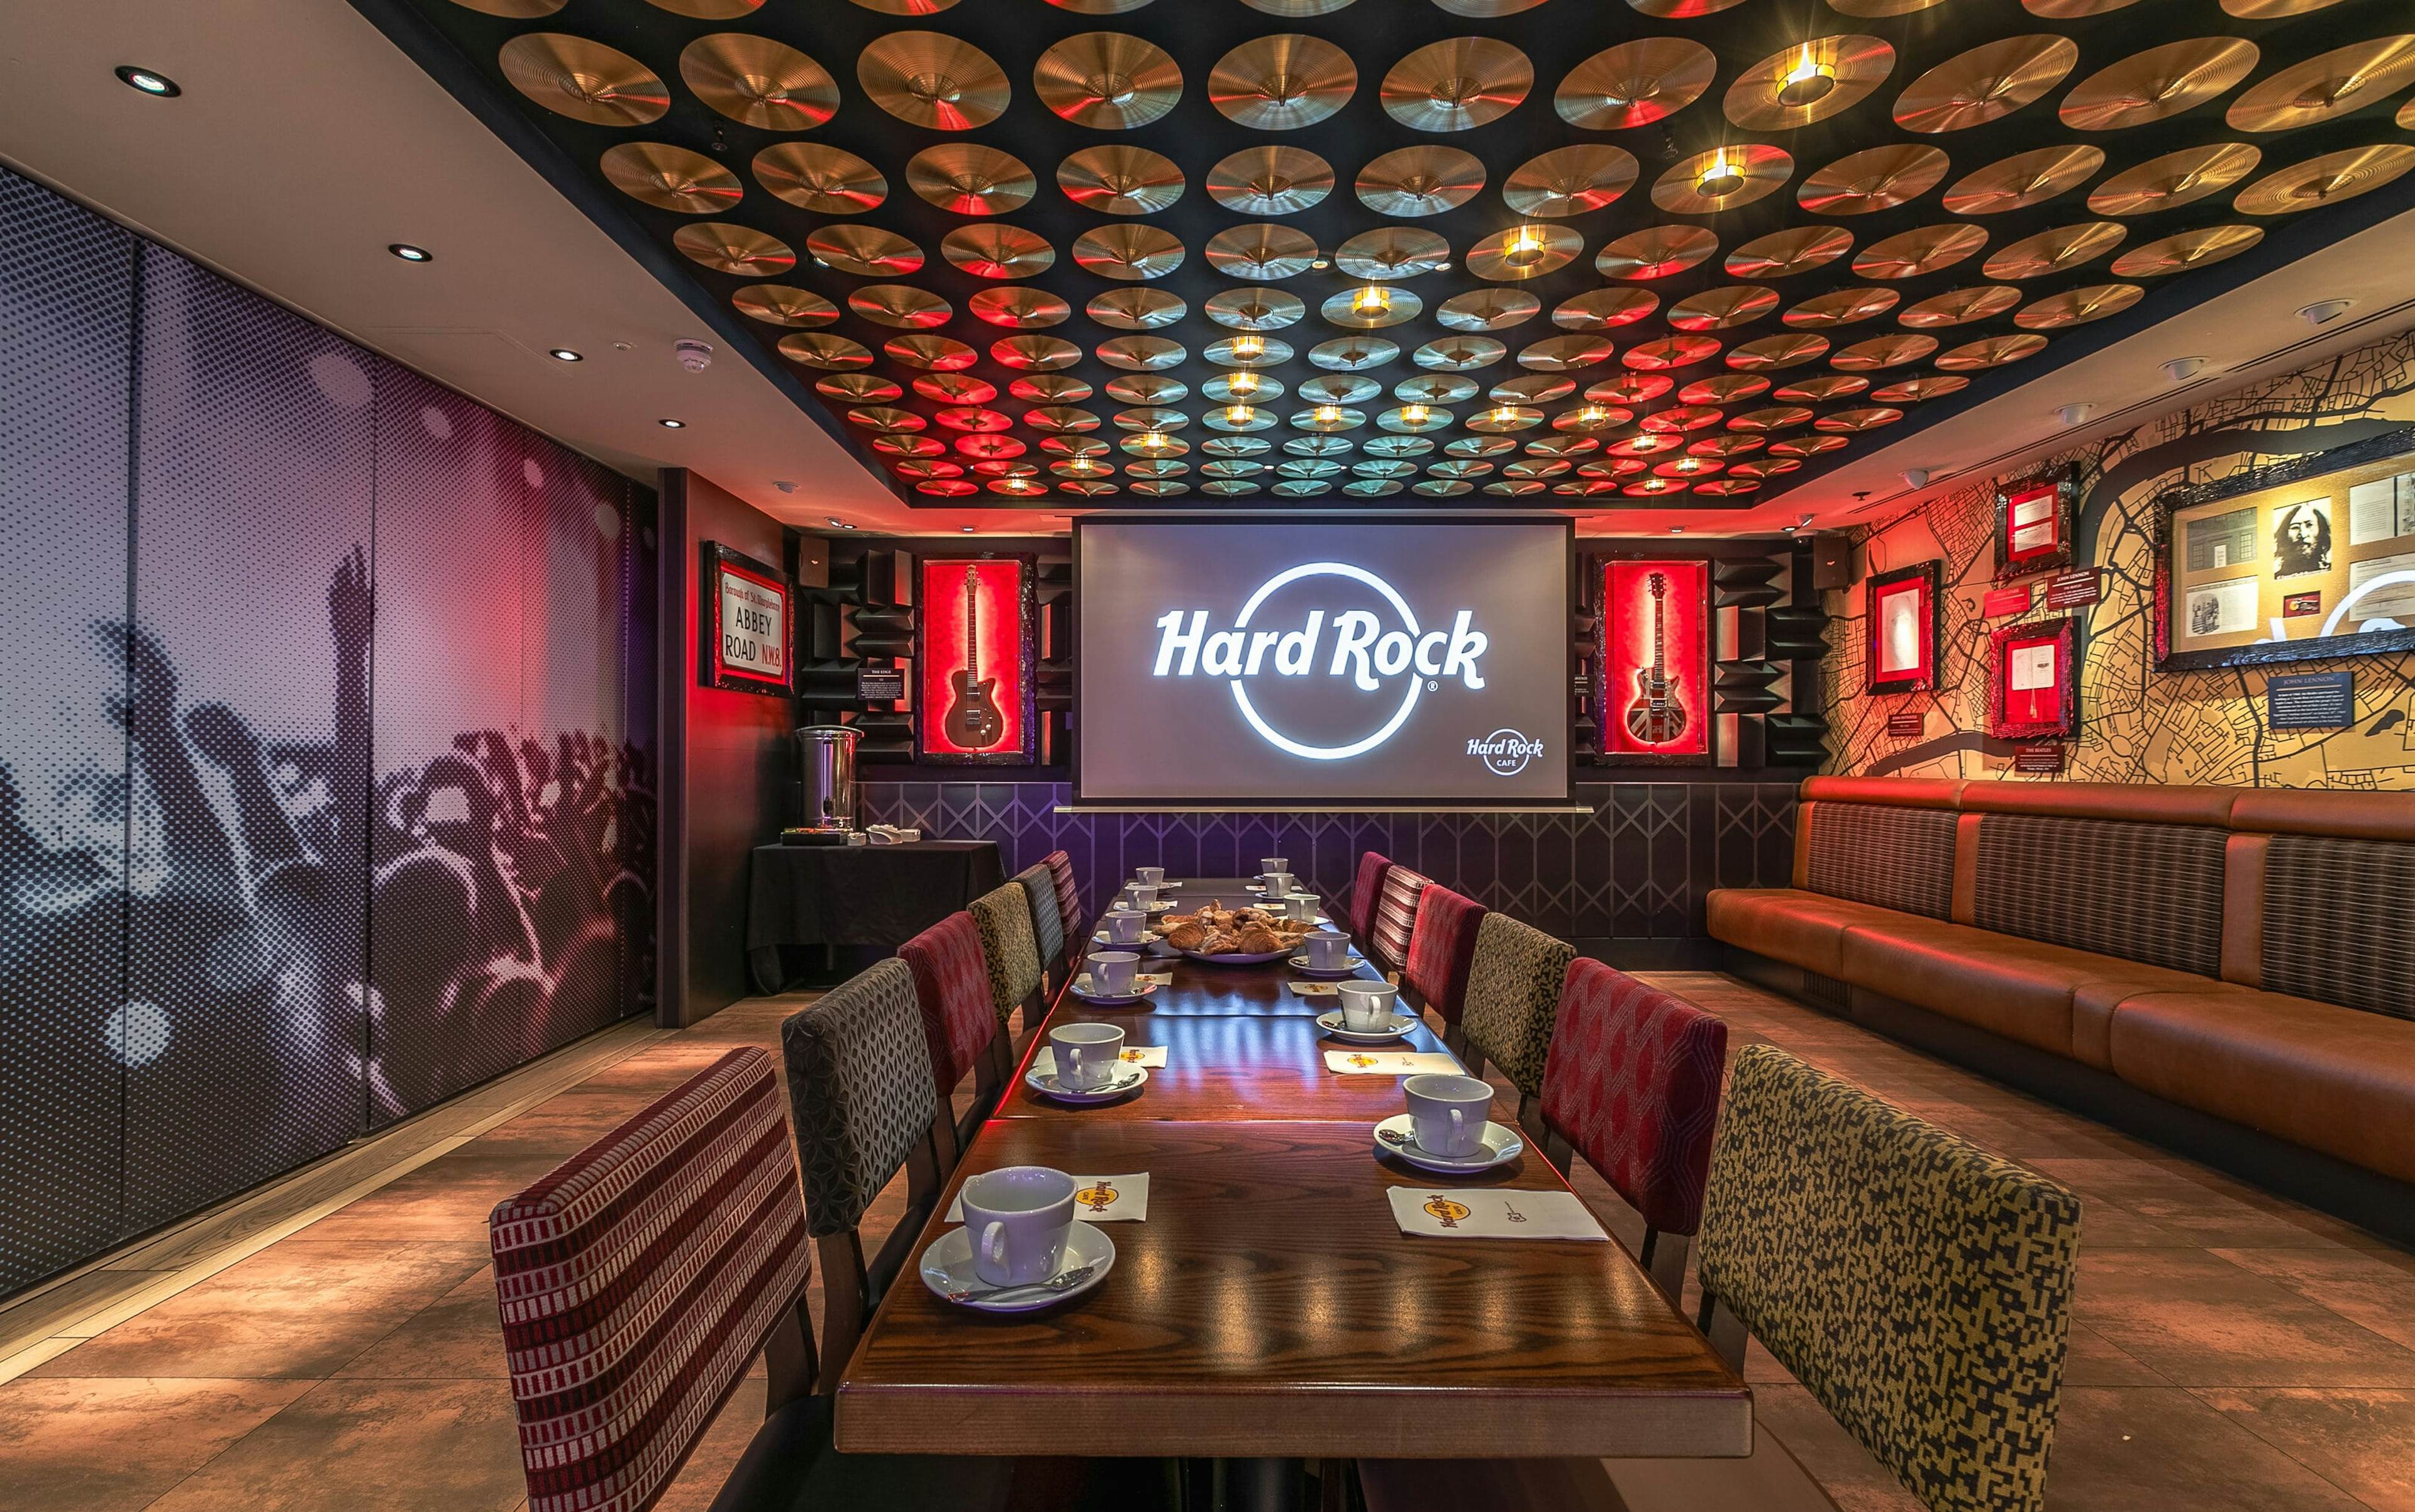 Hard Rock Cafe Piccadilly Circus - Legends Room image 1